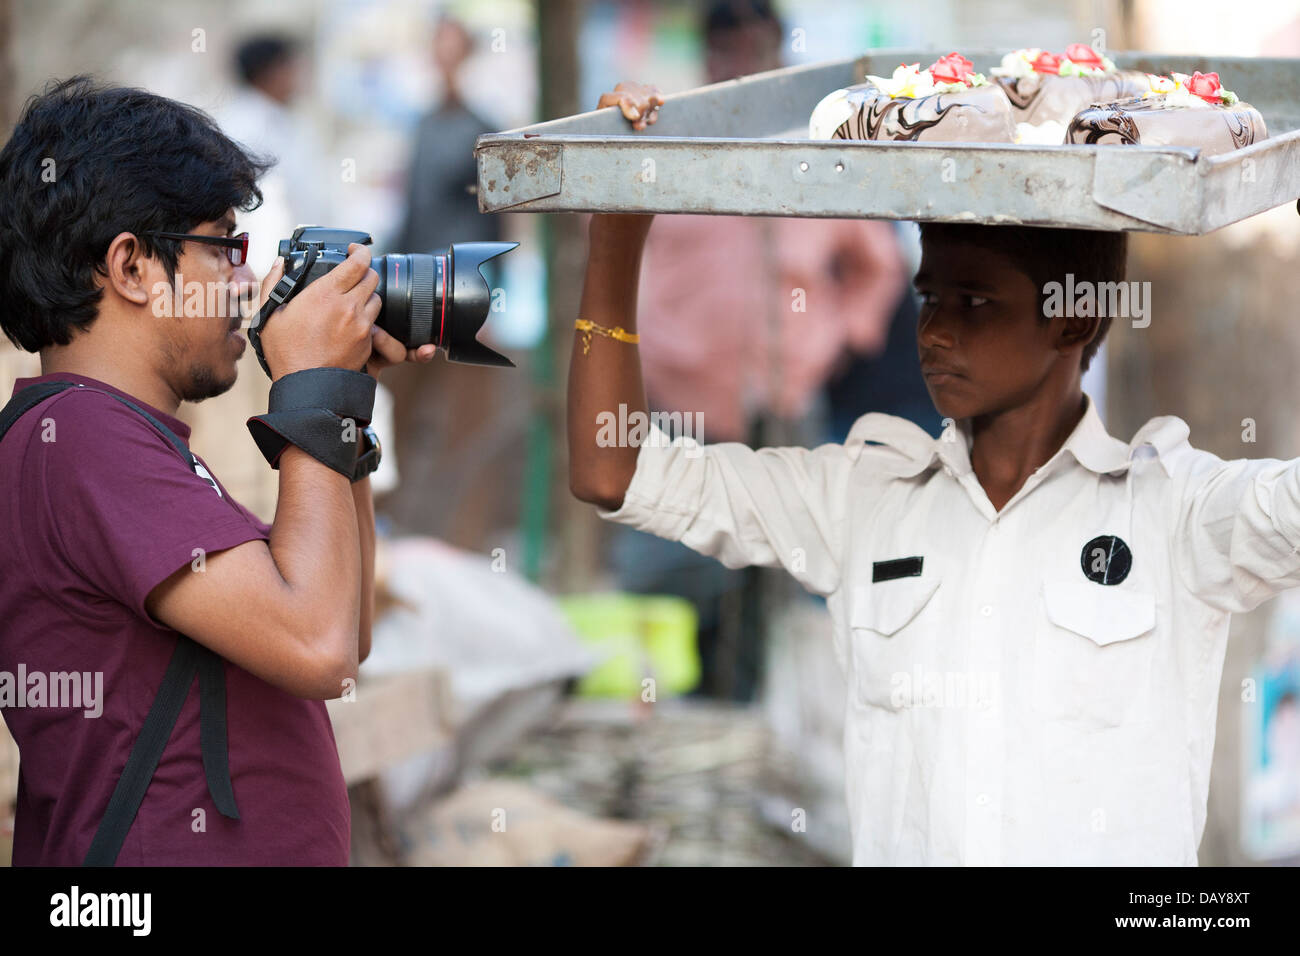 A student photographer takes a photograph with a Canon camera of a man on the streets of the old city of Dhaka in Bangladesh. Stock Photo